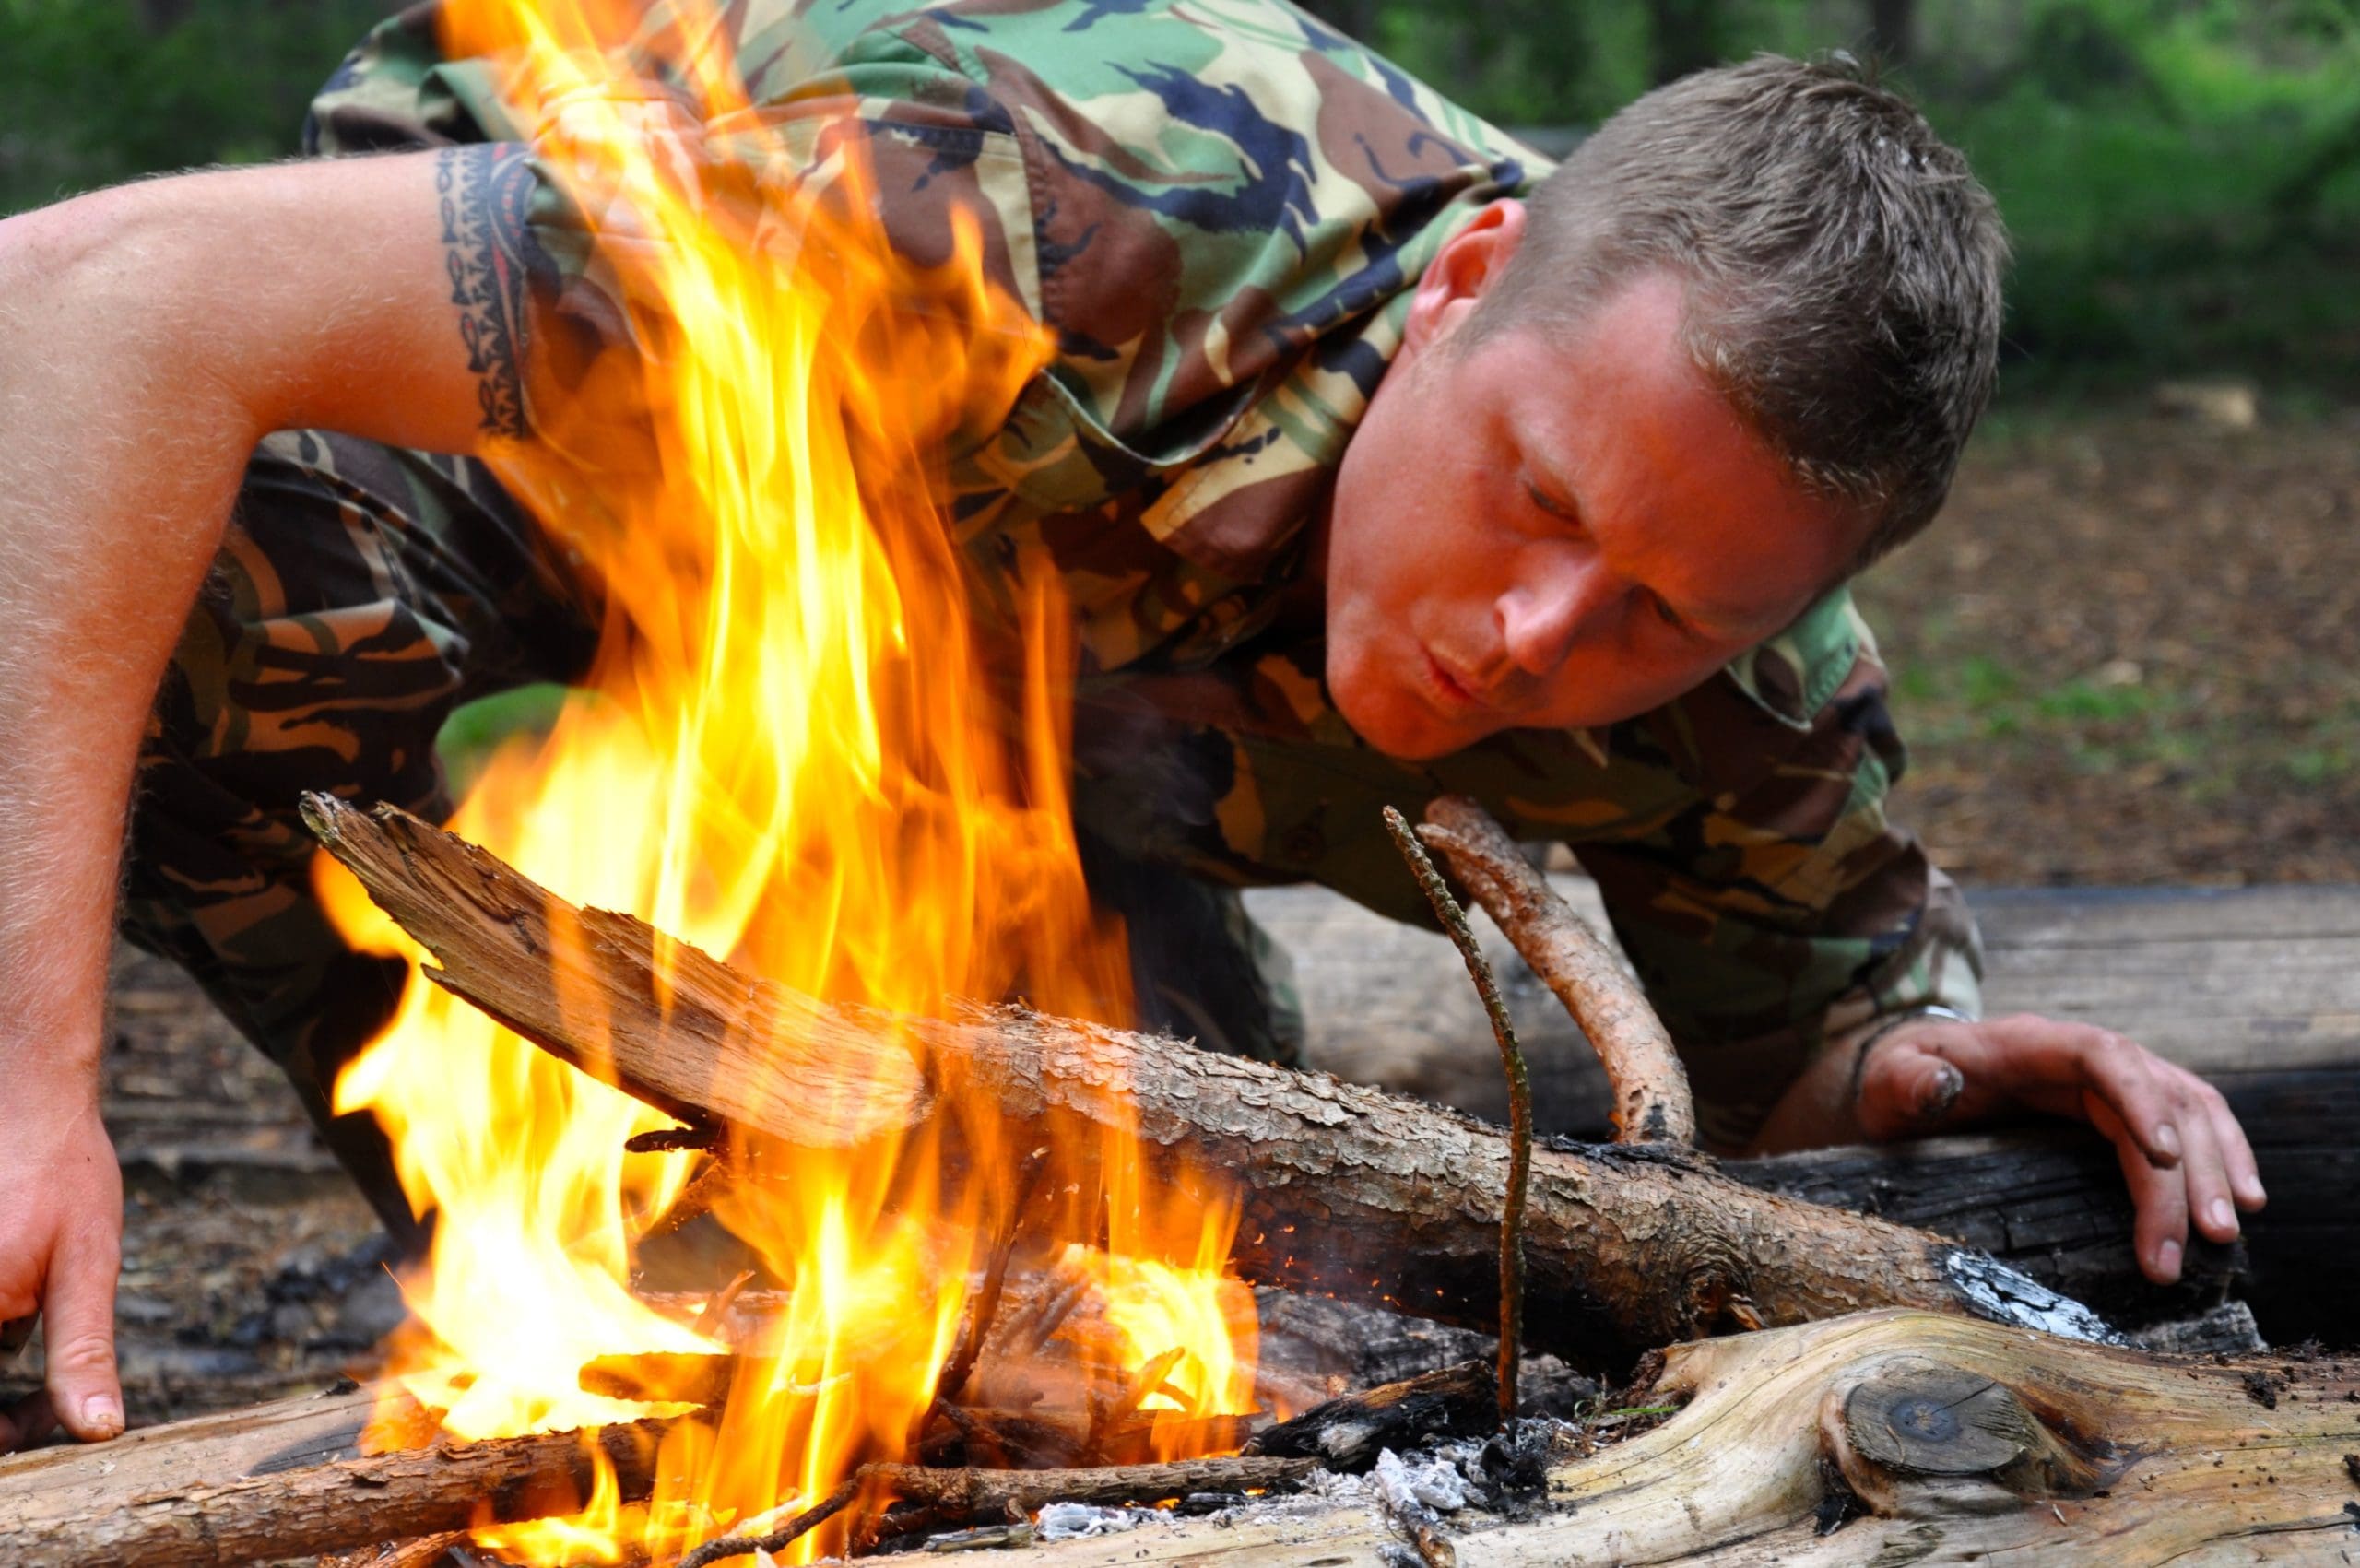 action adventure activities; a person trying to light fire